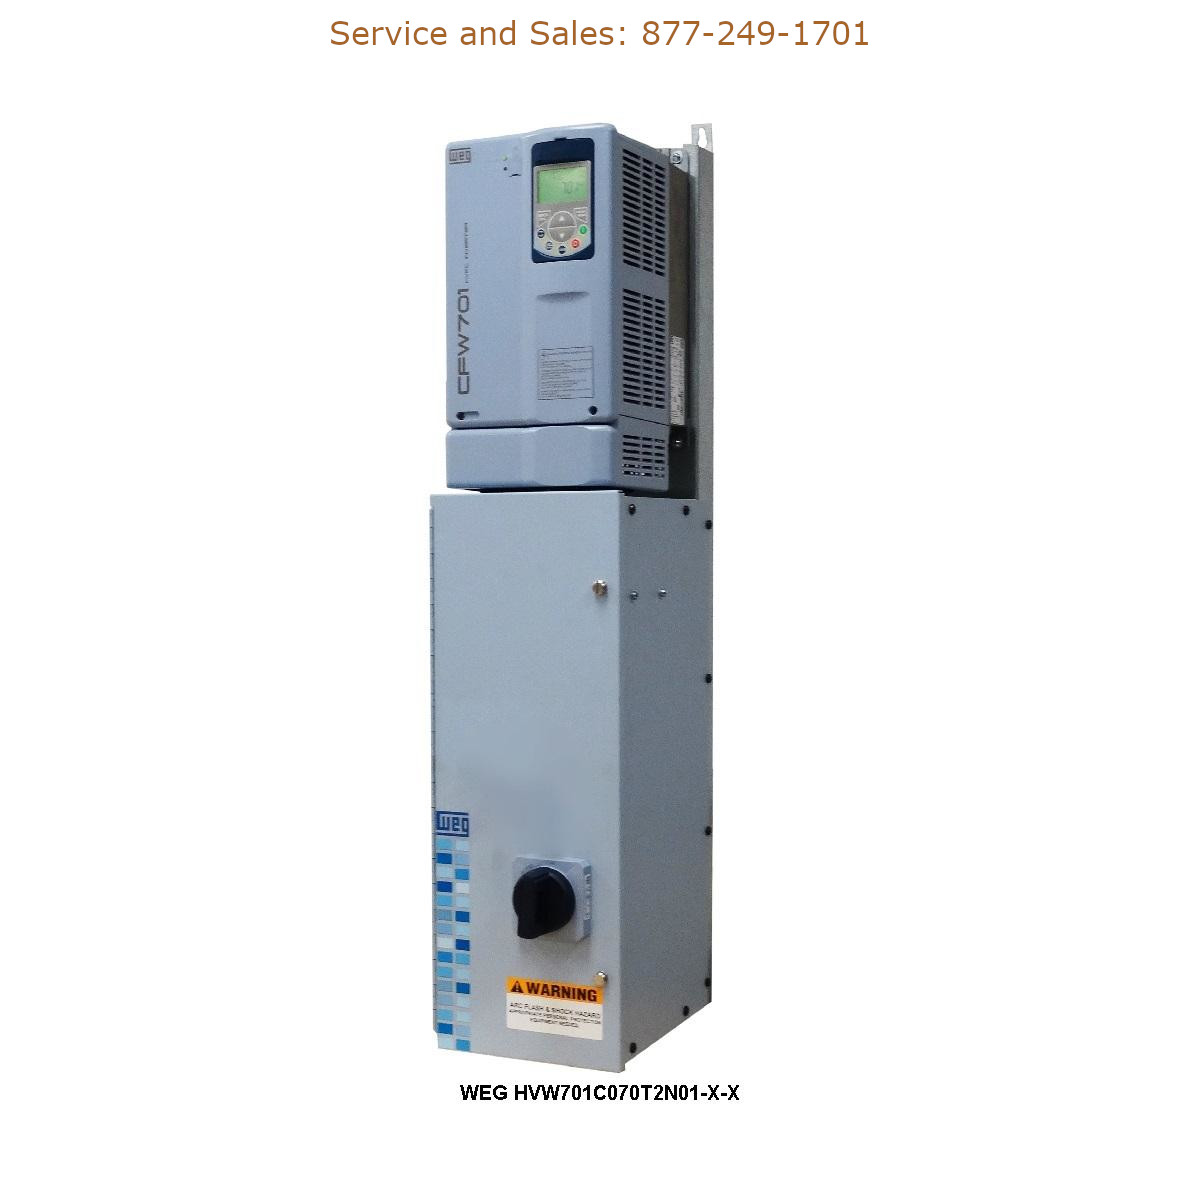 WEG HVW701C070T2N01-X-X WEG Model Number HVW701C070T2N01-X-X WEG Drives, Variable Speed Drives Repair Service, Troubleshooting, Replacement Parts https://gesrepair.com/wp-content/uploads/2022/WEG/WEG_HVW701C070T2N01-X-X_Drives_Variable_Speed_Drives.jpg